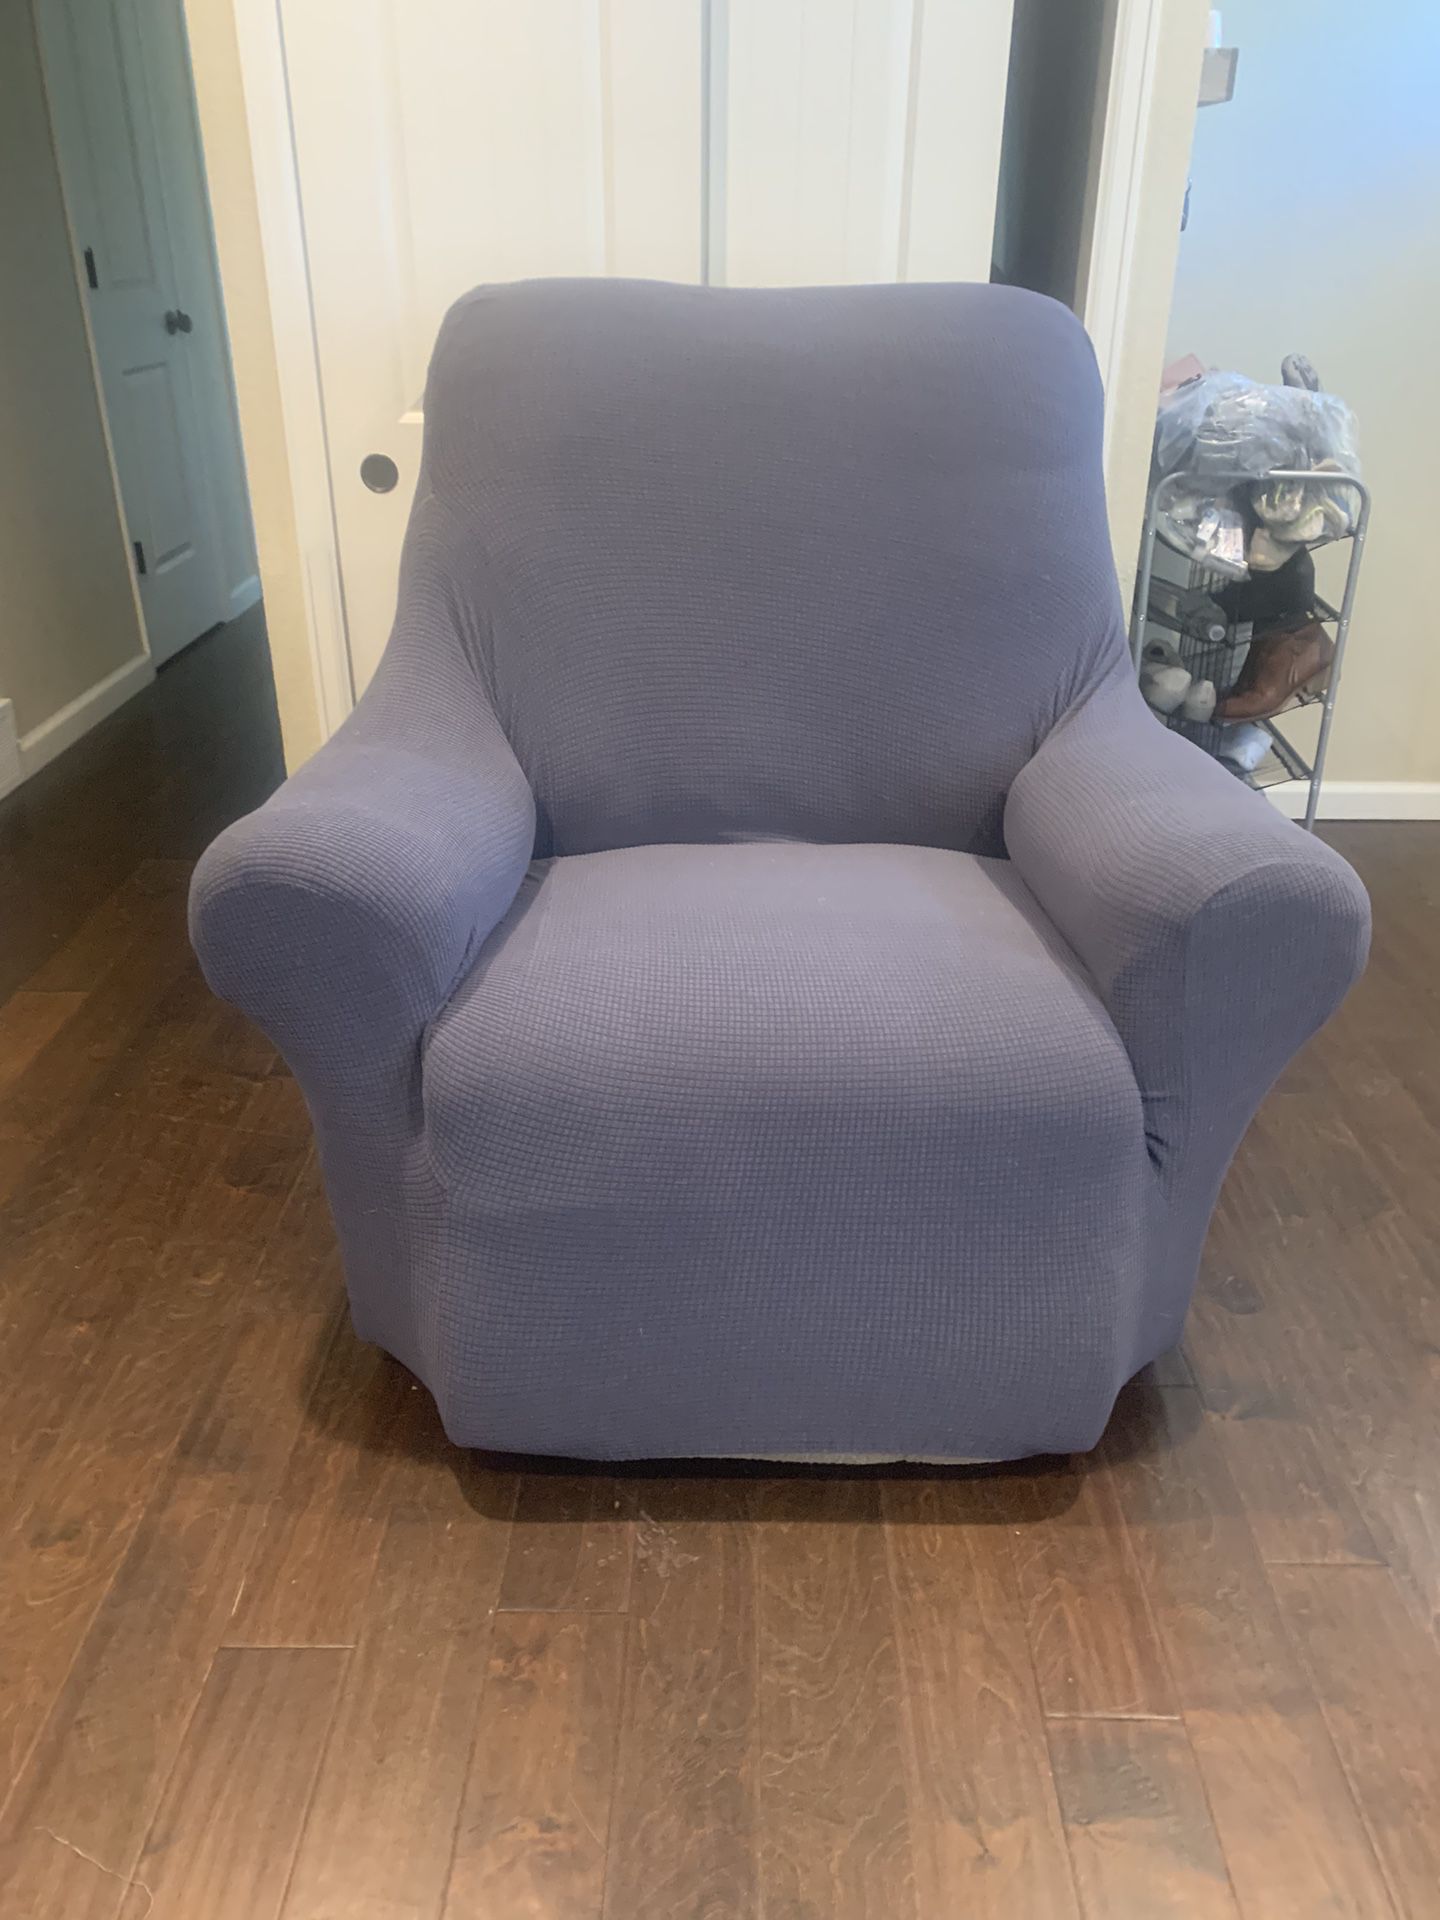 Free Chair And Couch